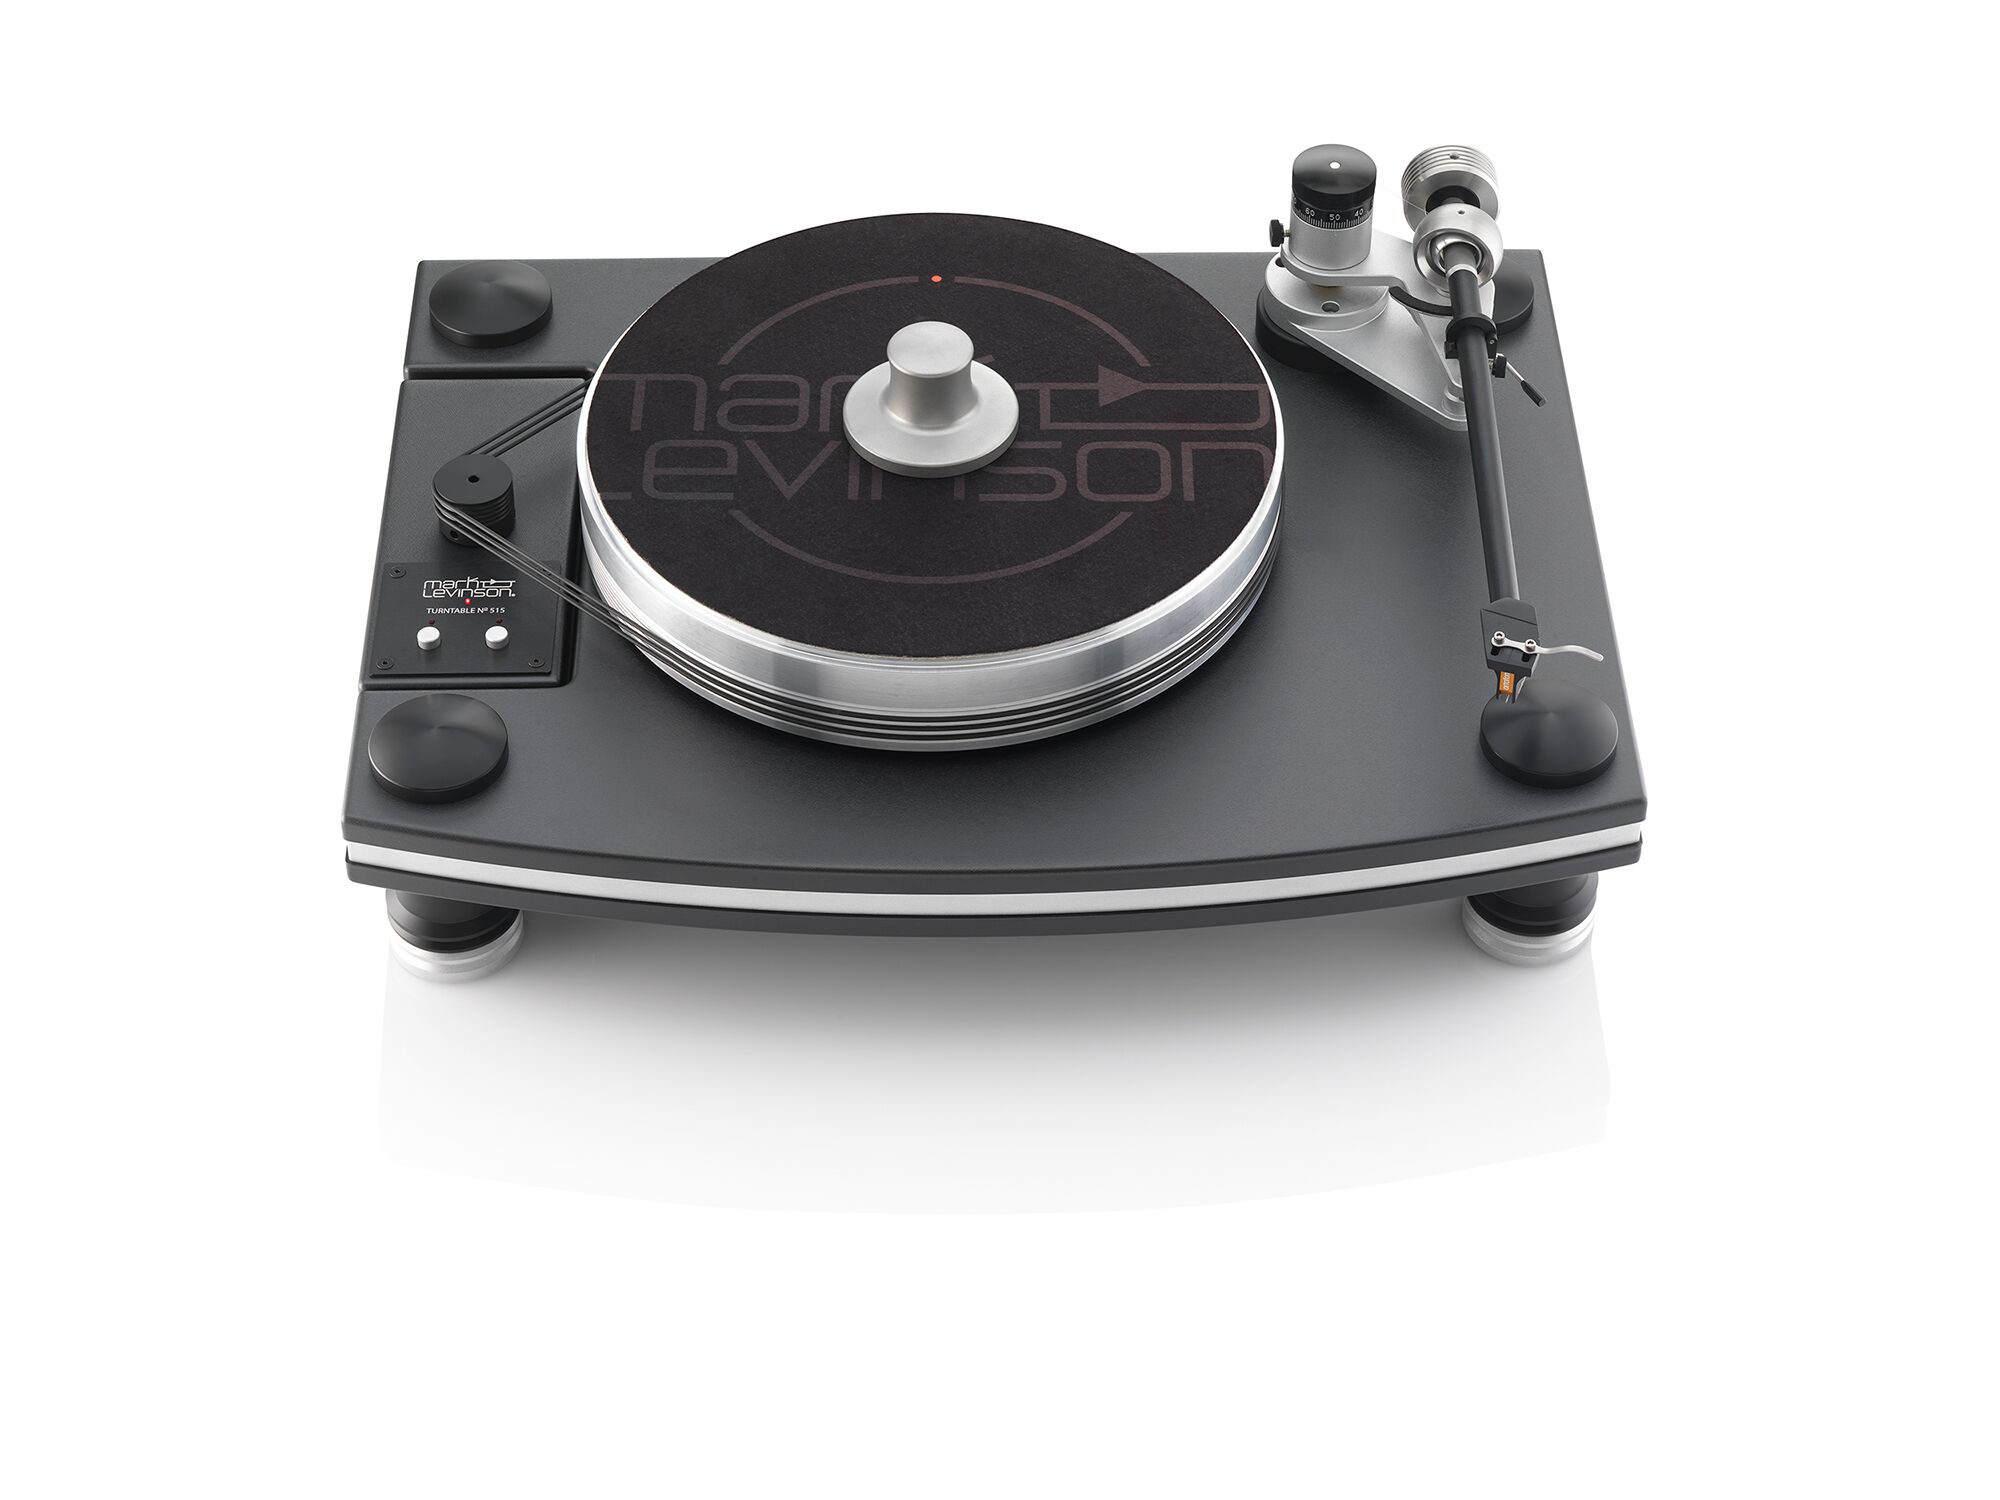 Mark Levinson No. 515 Turntable Front